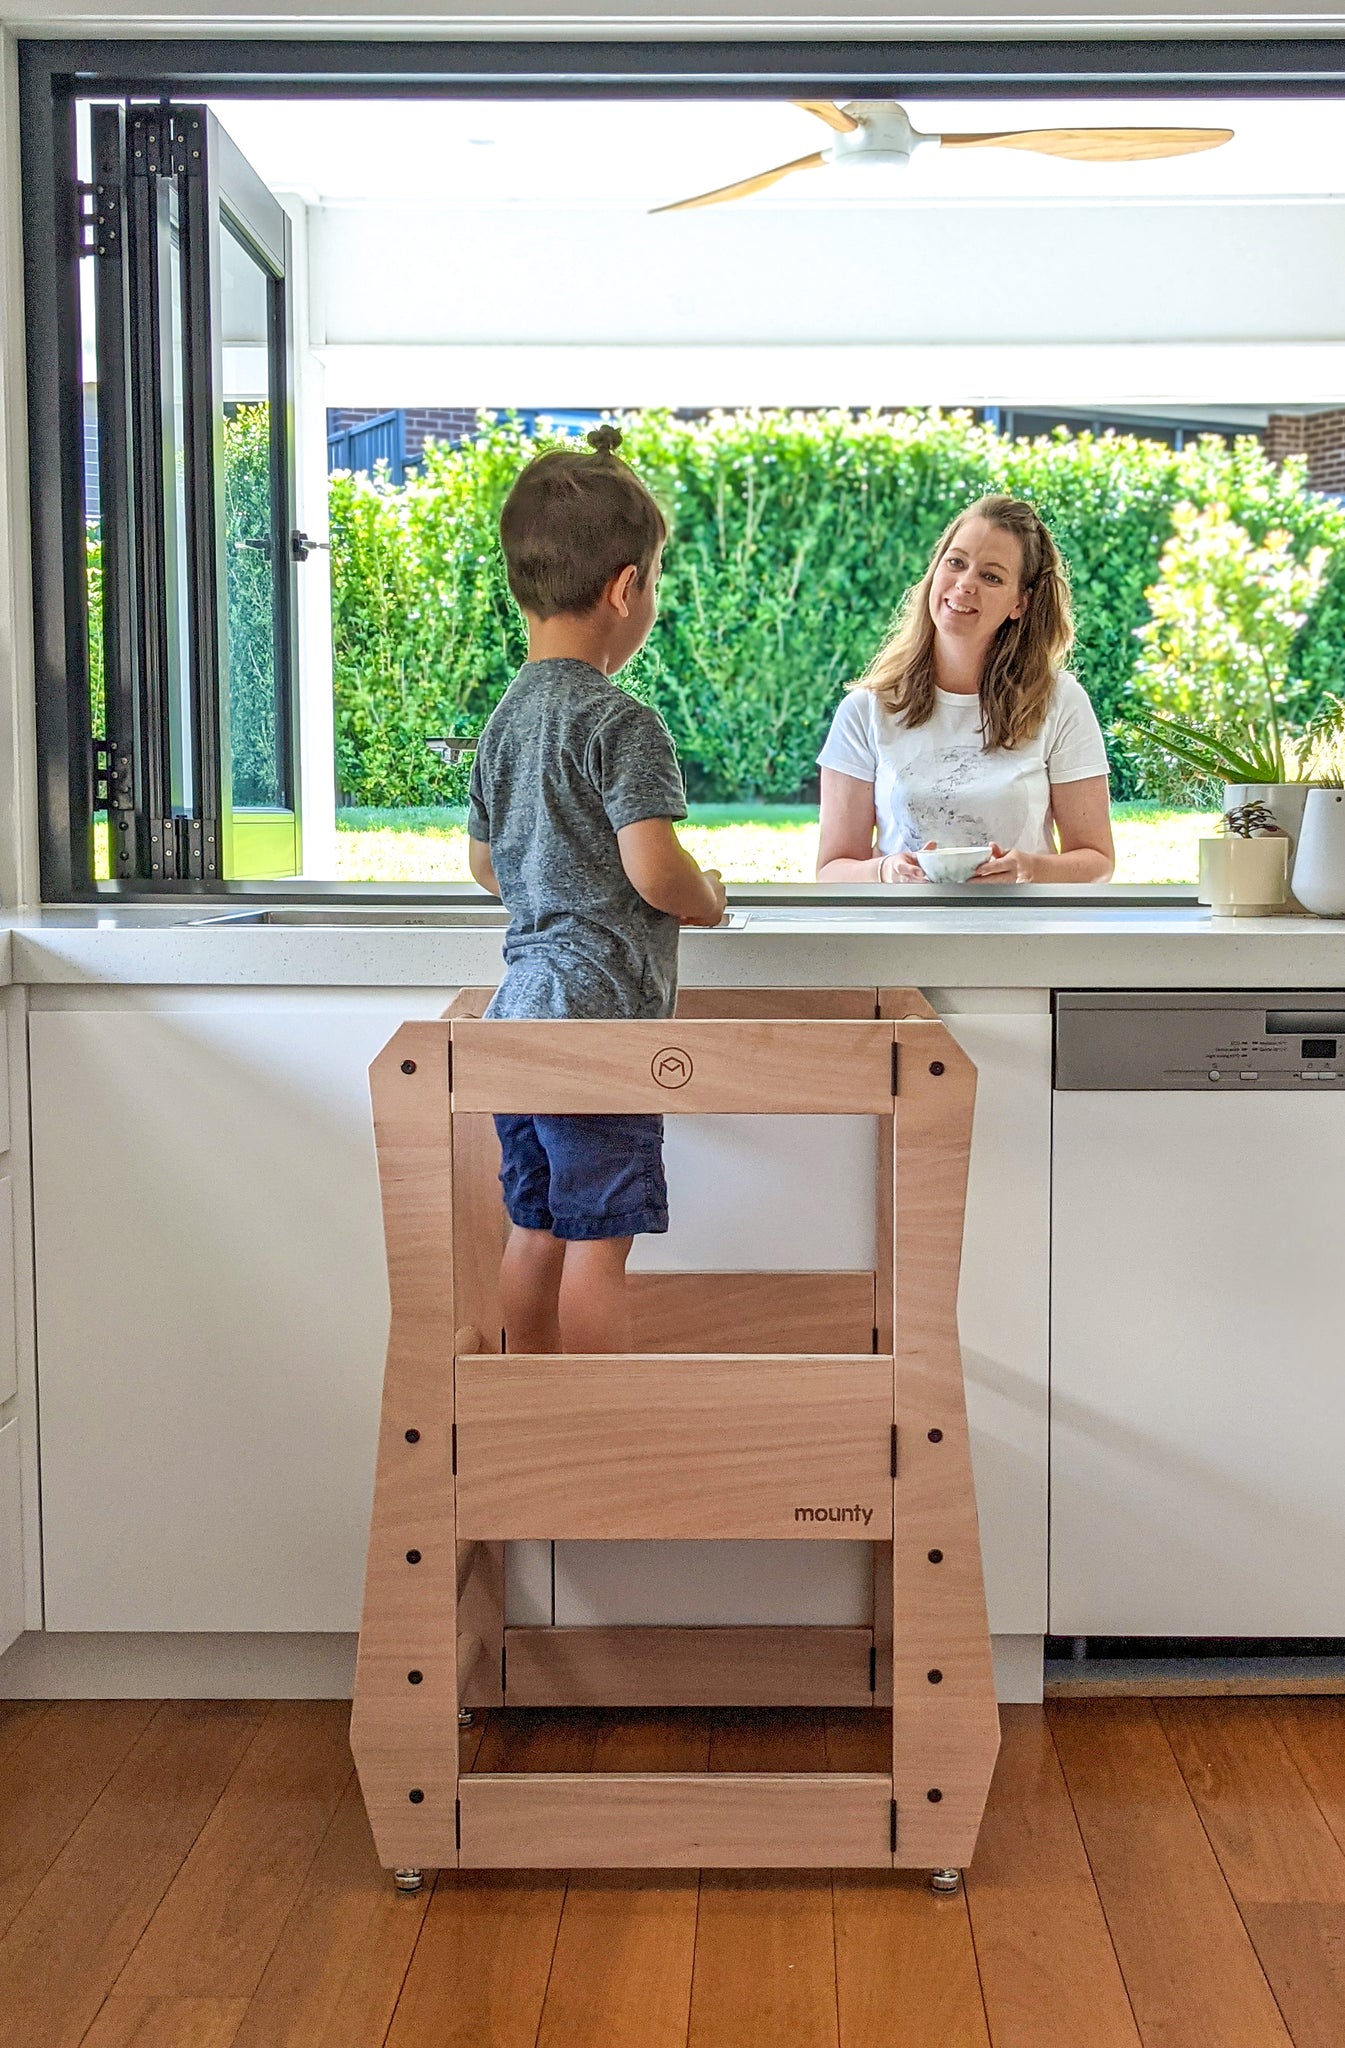 MOLTO BENE Foldable Learning Tower